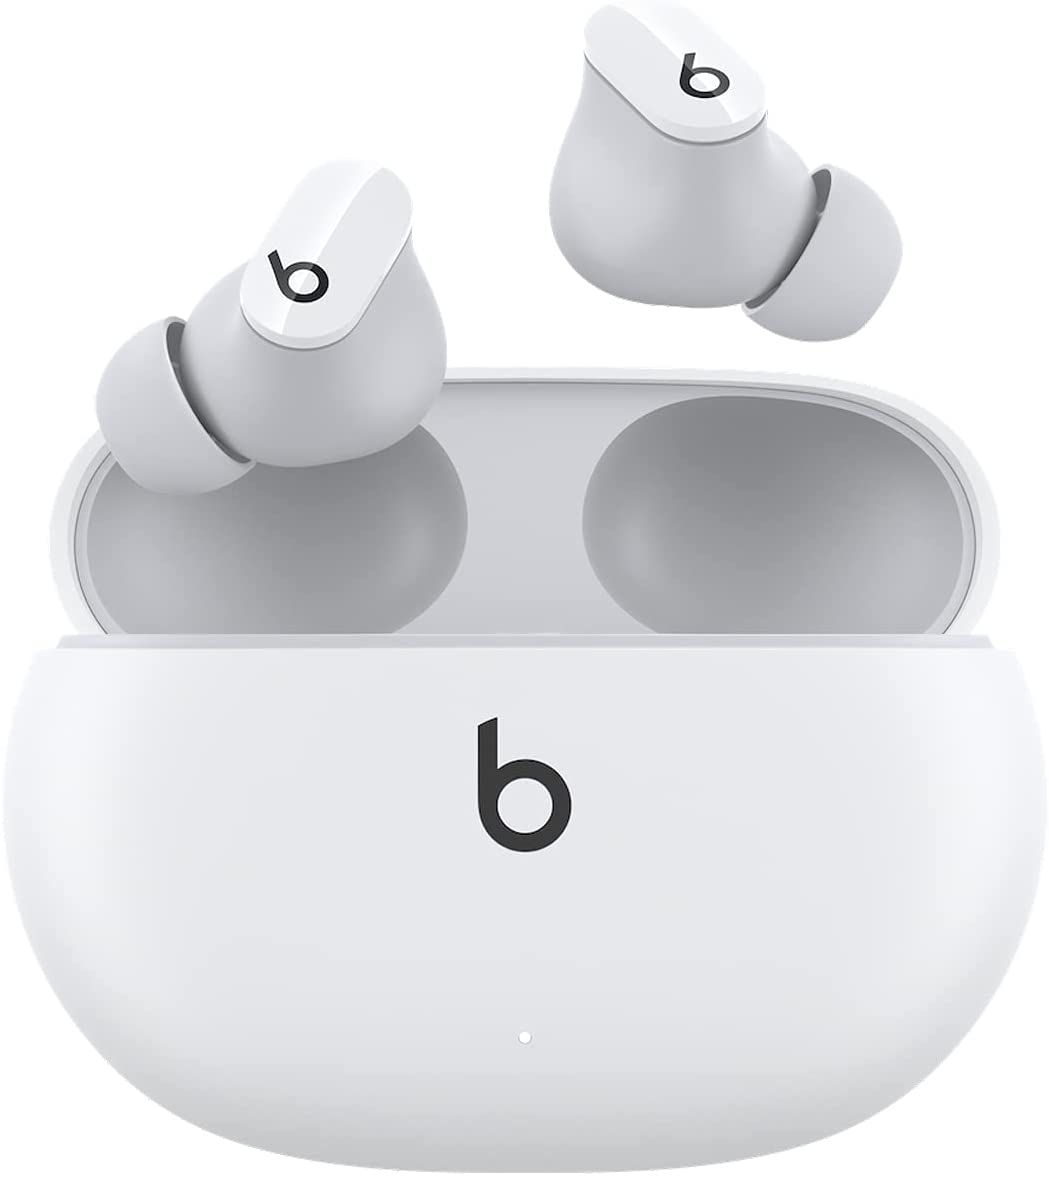 Beats Studio Buds Noise Cancelling Wireless Earbuds - White (New)